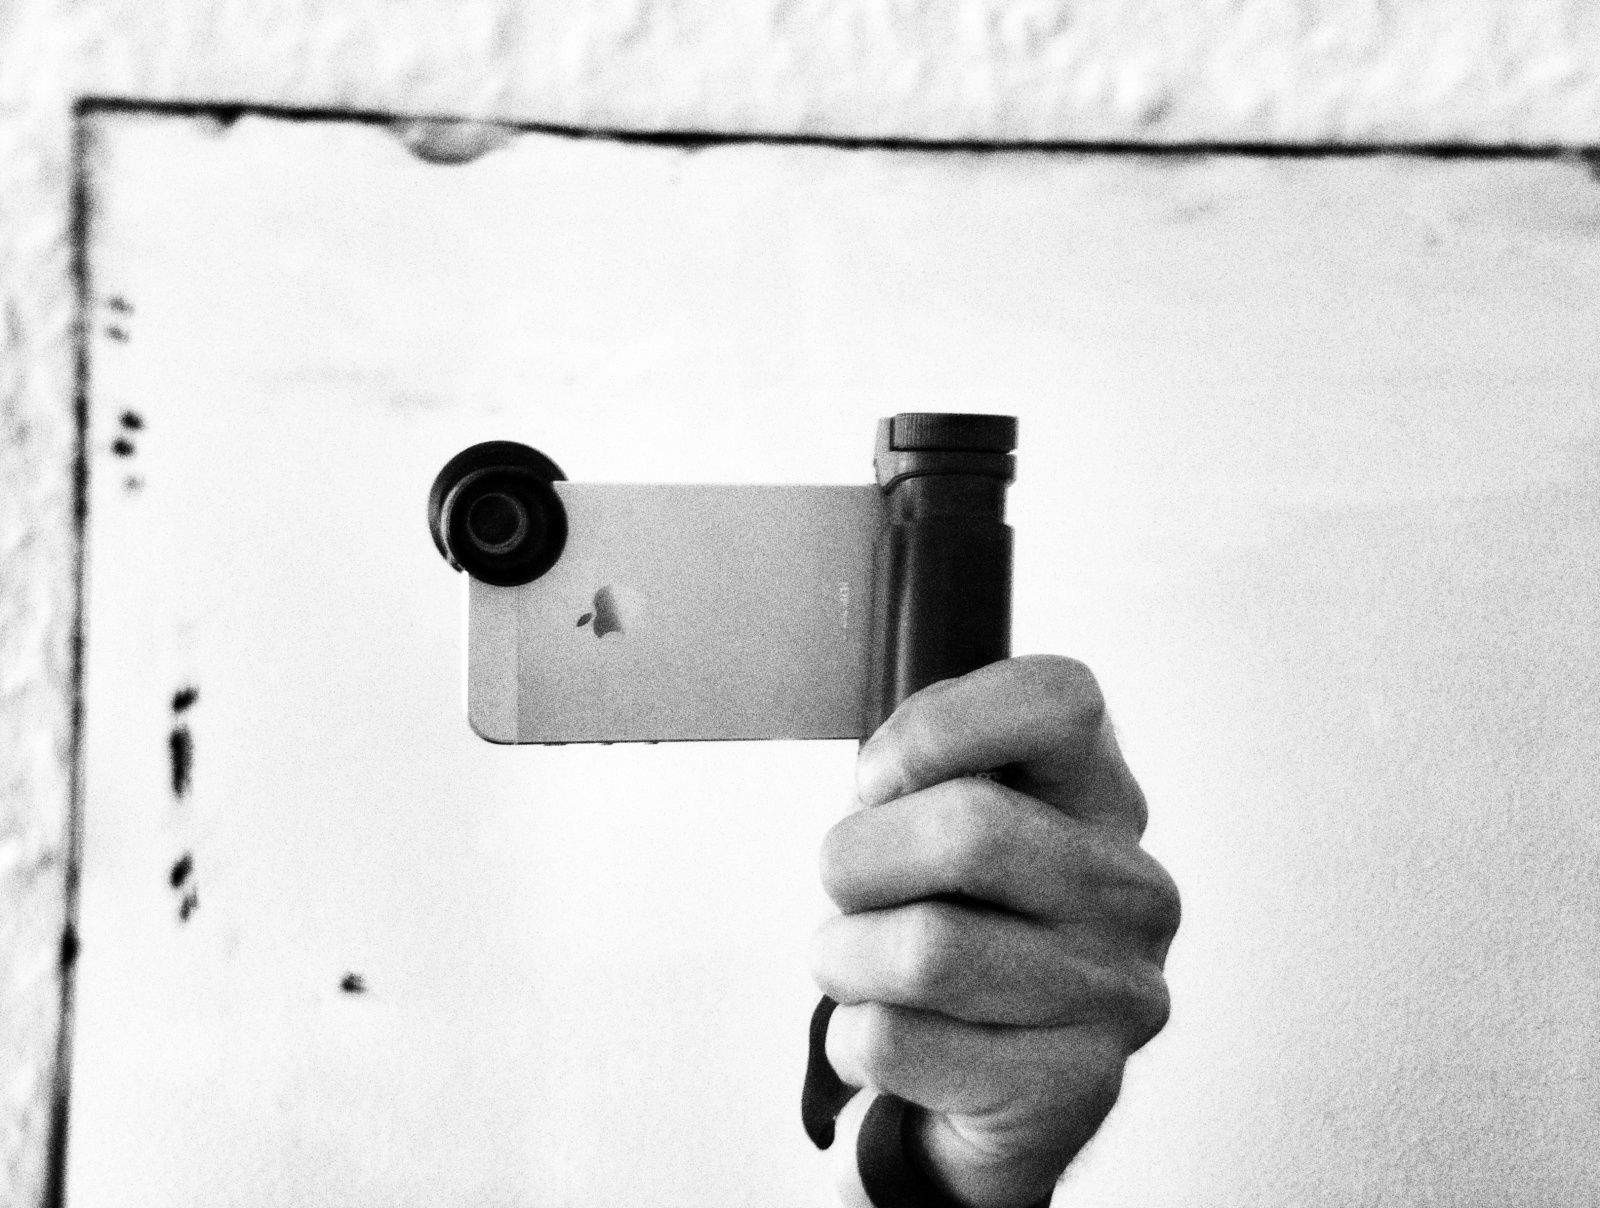 One handed-selfies are now even easier. Photos Charlie Sorrel/Cult of Mac